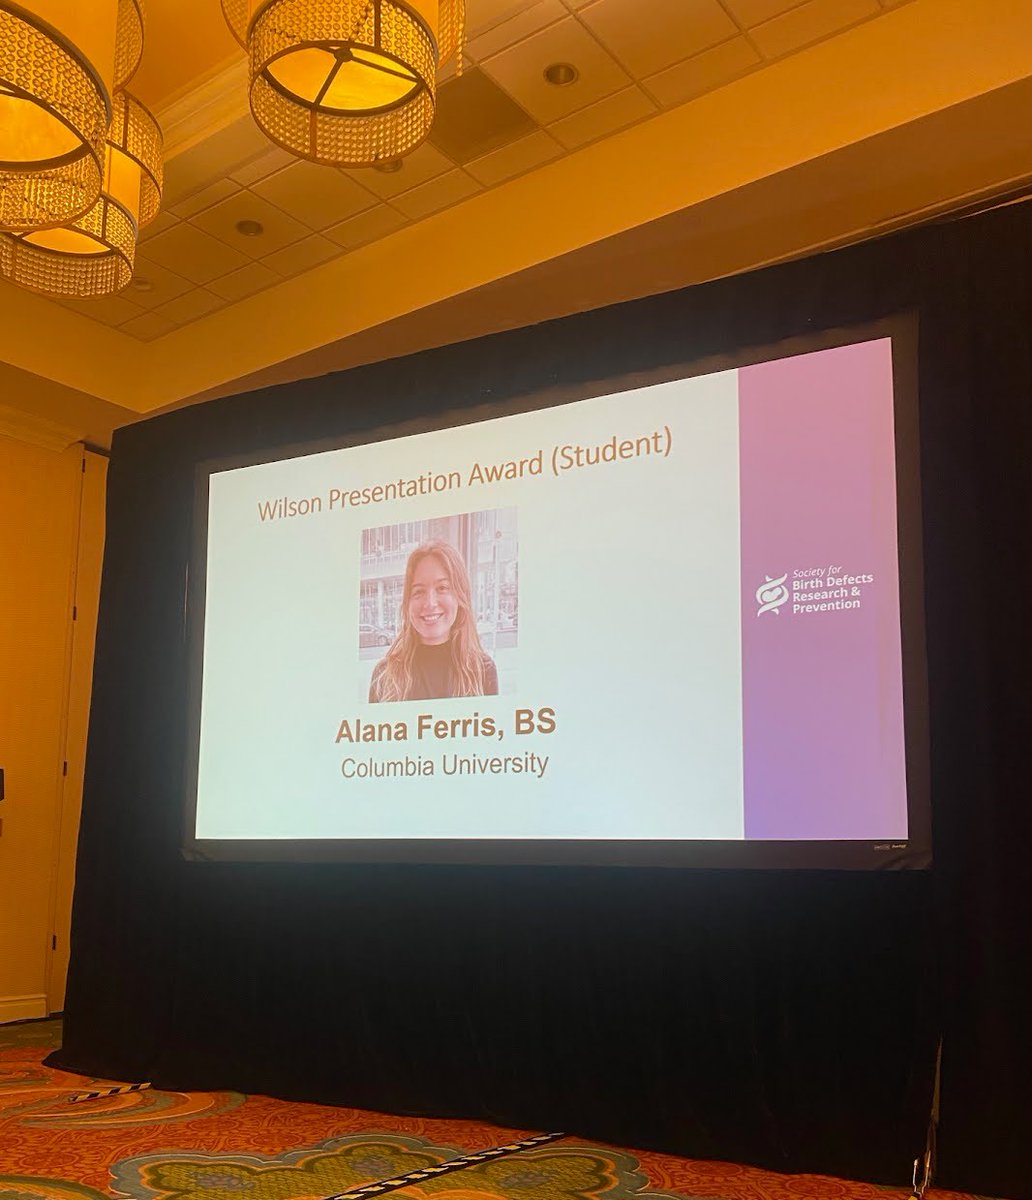 Congratulations to @ColumbiaMSPH PhD student Alana Ferris for winning the Wilson Presentation award @SocBirthDefects for her work characterizing epitranscriptomic regulators in a trophoblast cell line!